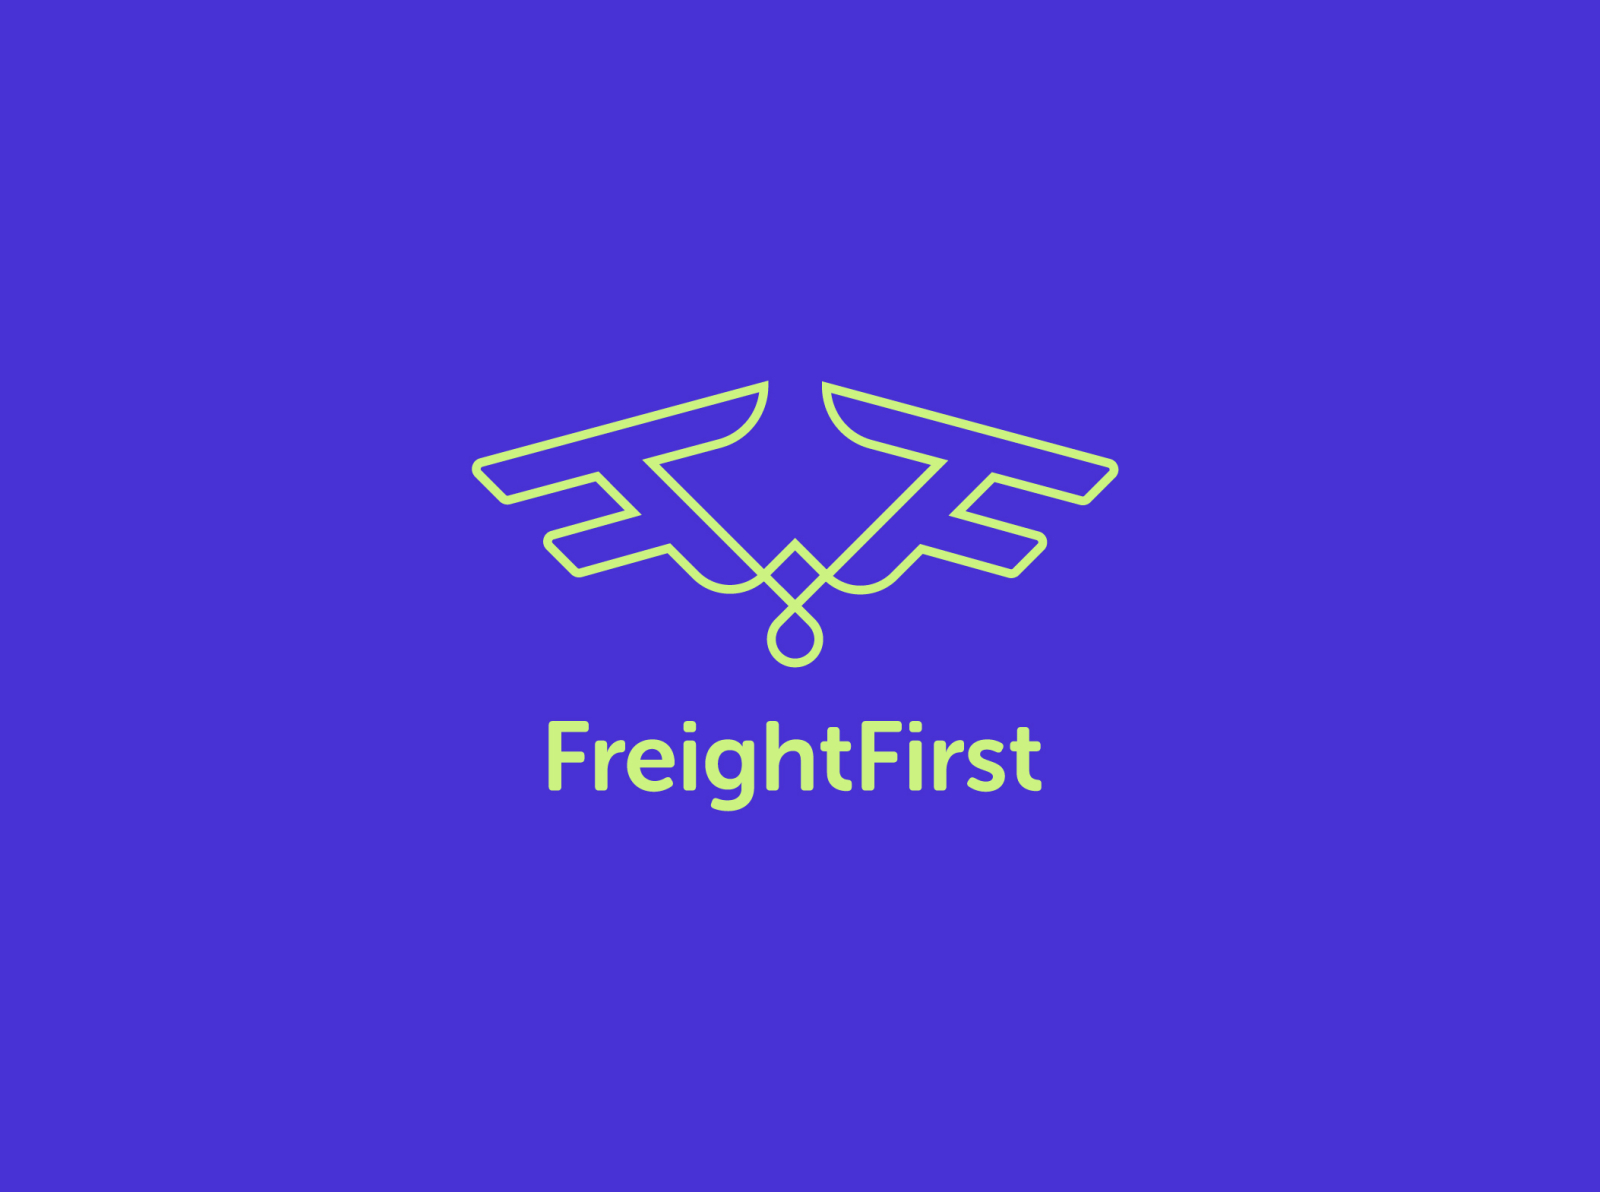 LogoCore - Day 04: Freight First Logo by Irina Curovic on Dribbble